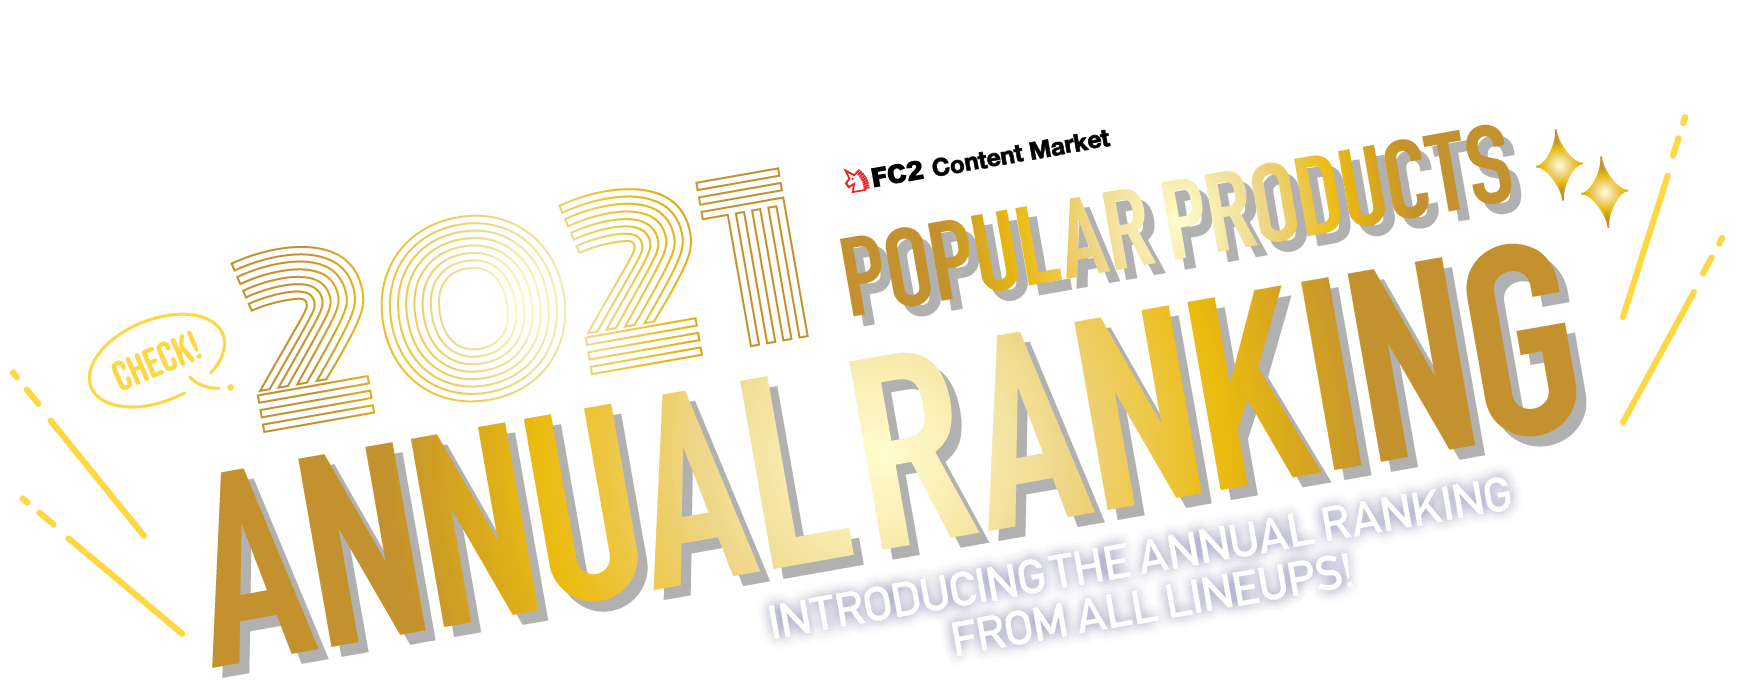 2021 Annual Popular Product Ranking